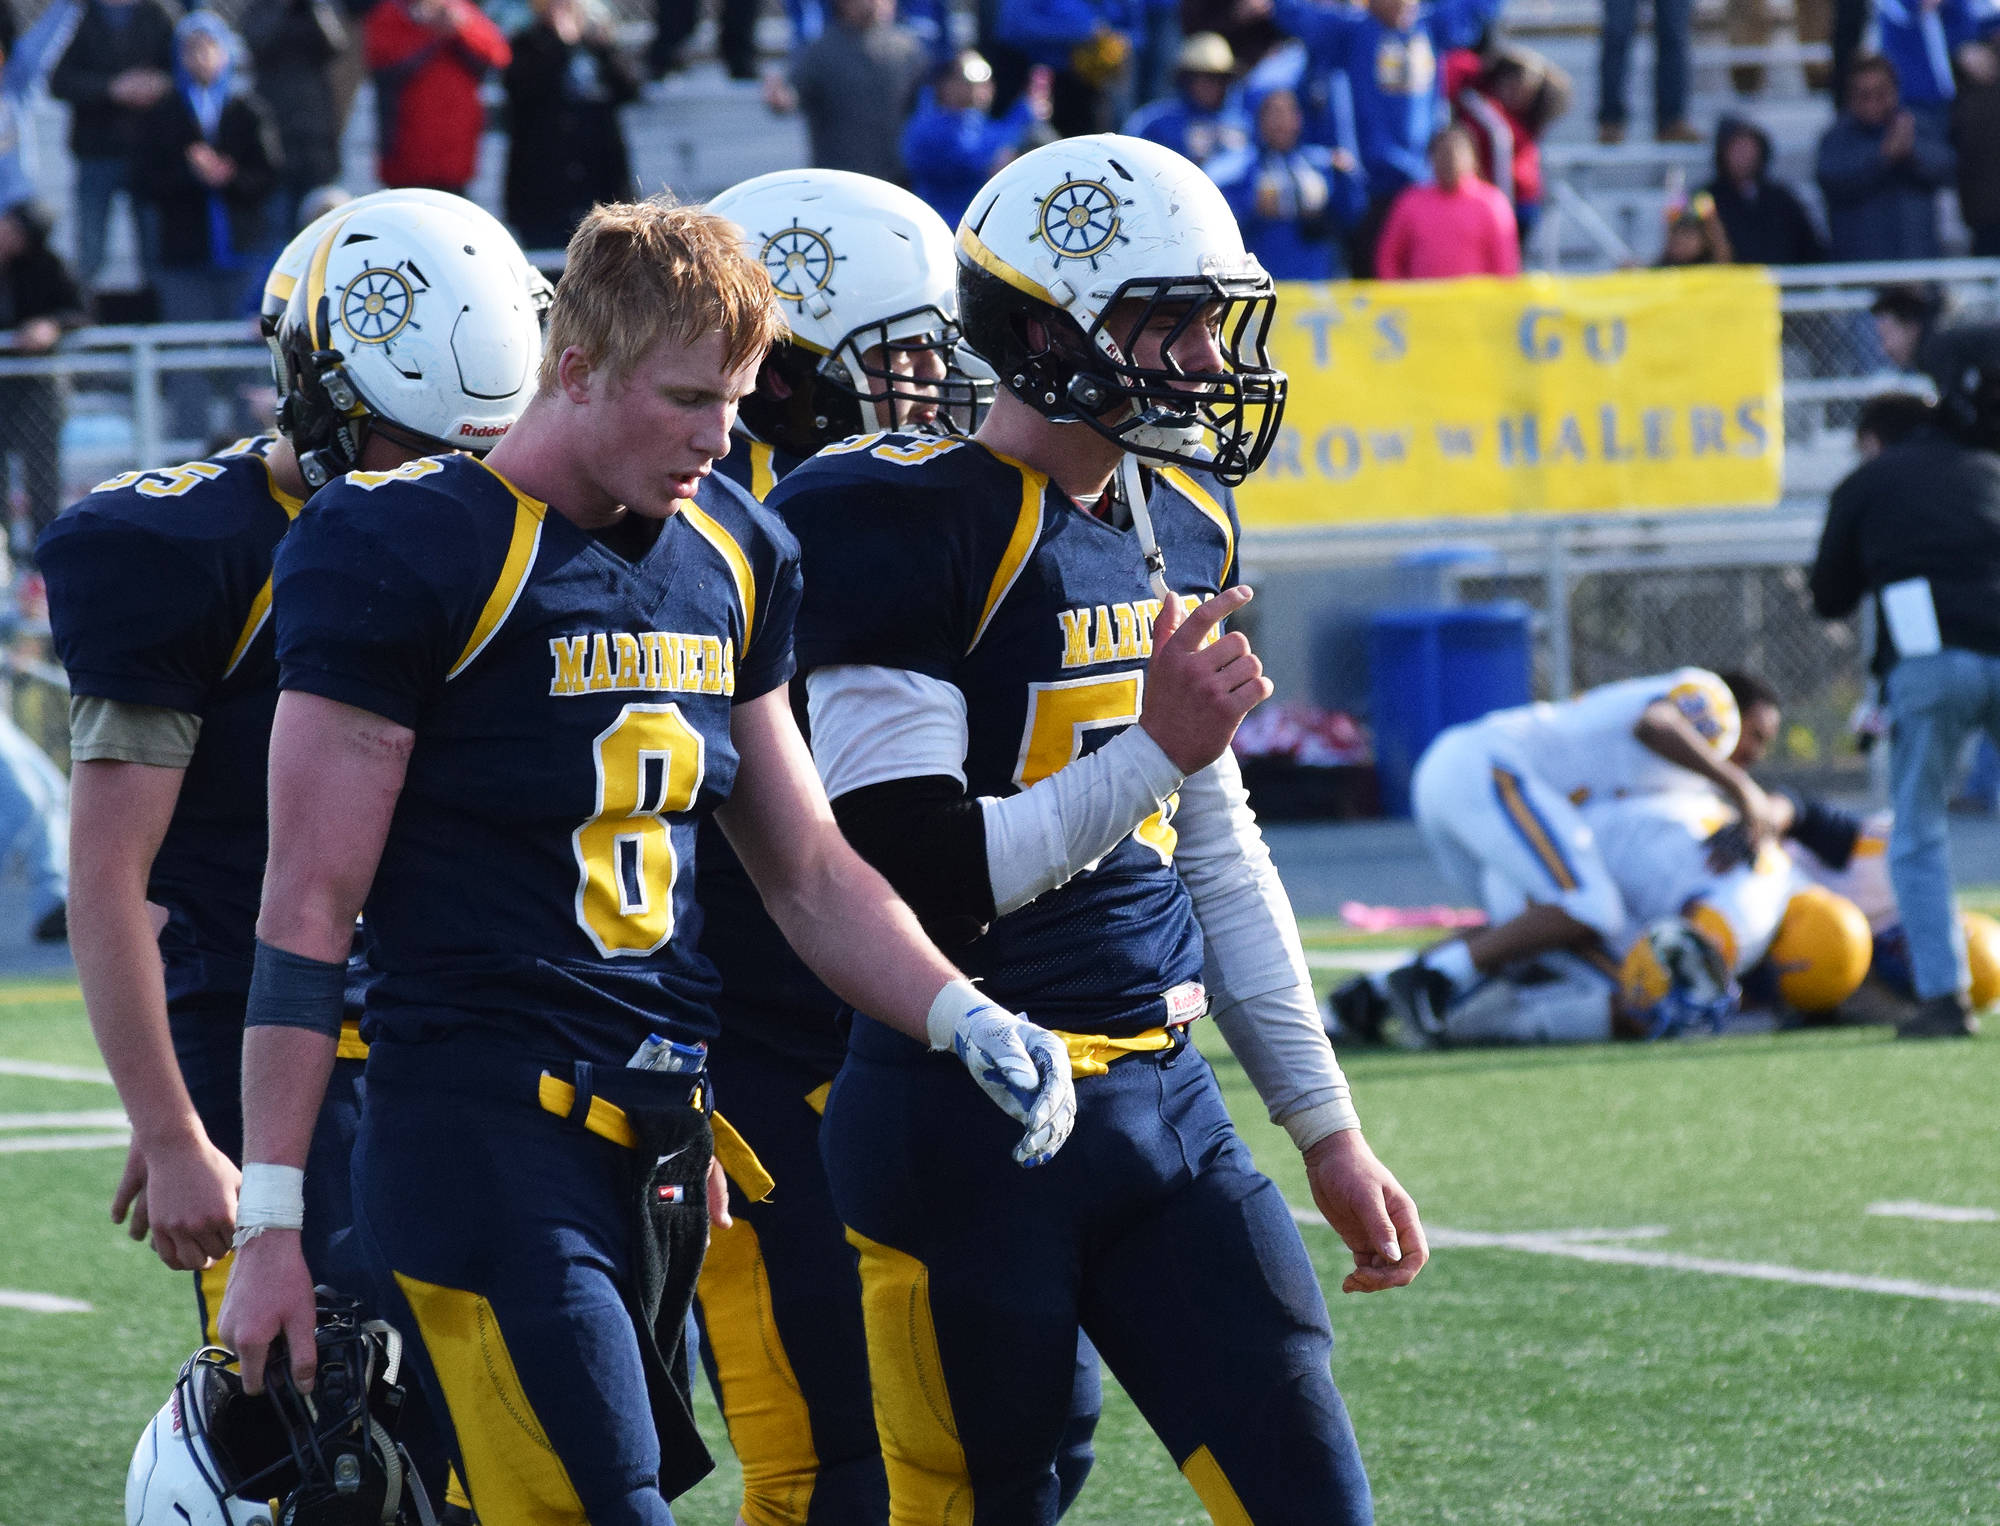 Homer senior Teddy Croft (8) walks off the field with a group of teammates Saturday while the Utqiagvik Whalers celebrate in the ASAA First National Bank Division III state championship at Machetanz Field in Palmer. (Photo by Joey Klecka/Peninsula Clarion)